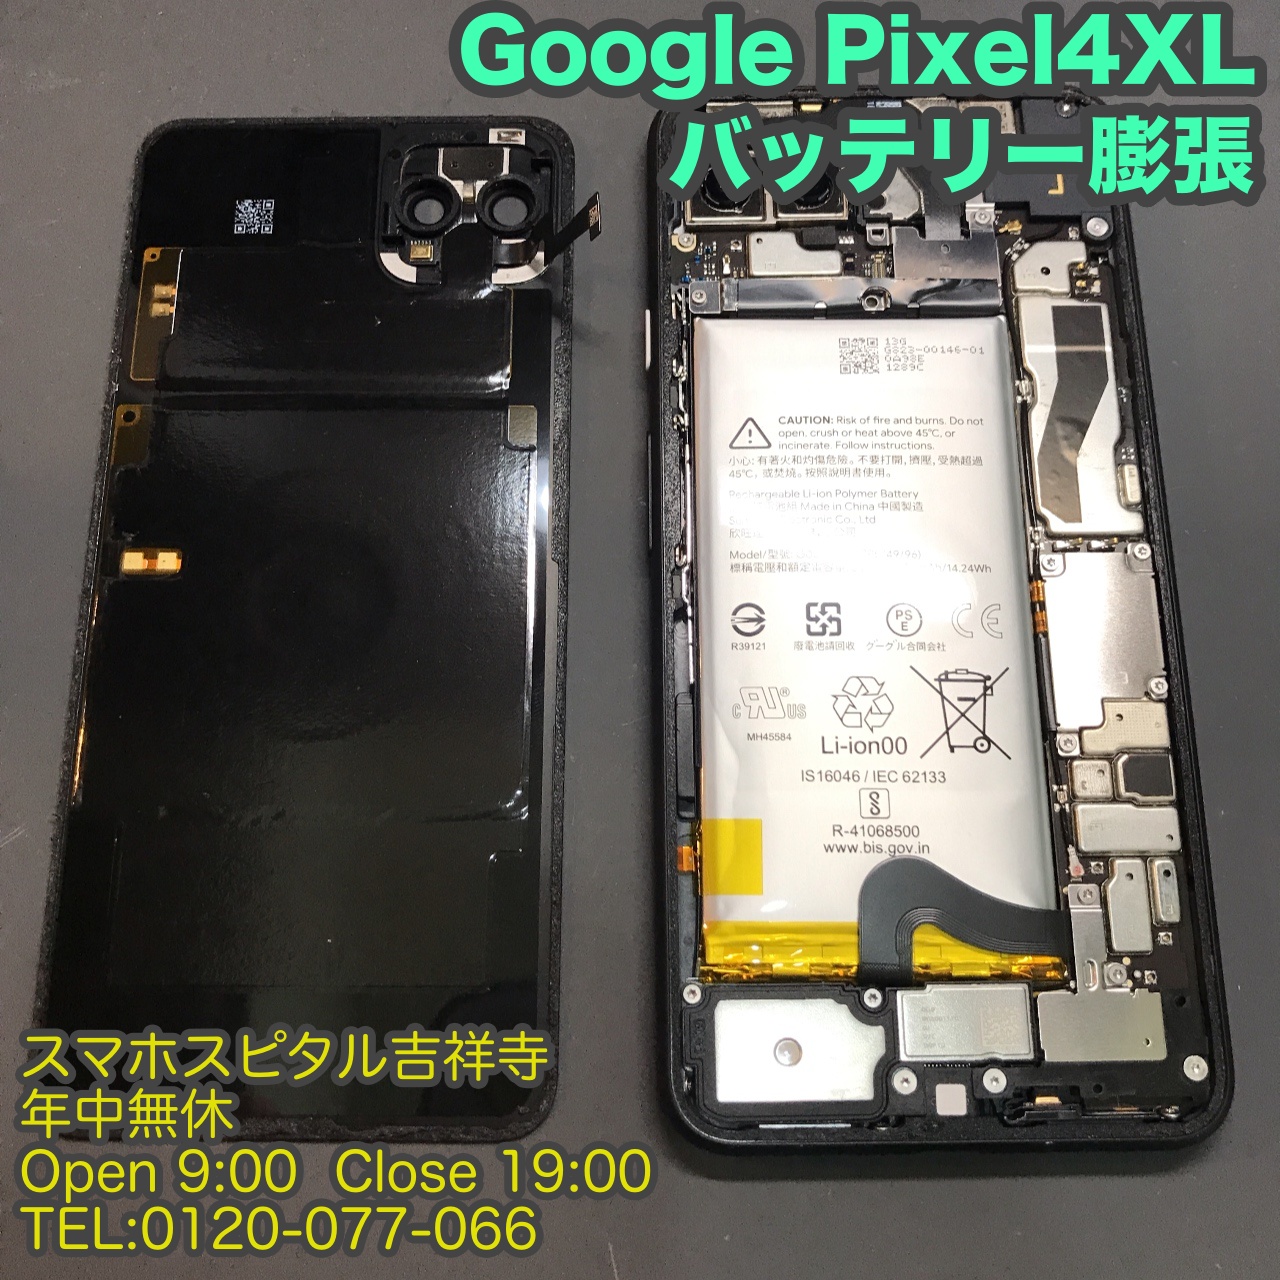 google-pixel-4xl-%e3%83%8f%e3%82%99%e3%83%83%e3%83%86%e3%83%aa%e3%83%bc%e8%86%a8%e5%bc%b5%e3%80%80android%e4%bf%ae%e7%90%86%e3%81%af%e3%82%b9%e3%83%9e%e3%83%9b%e3%82%b9%e3%83%92%e3%82%9a%e3%82%bf